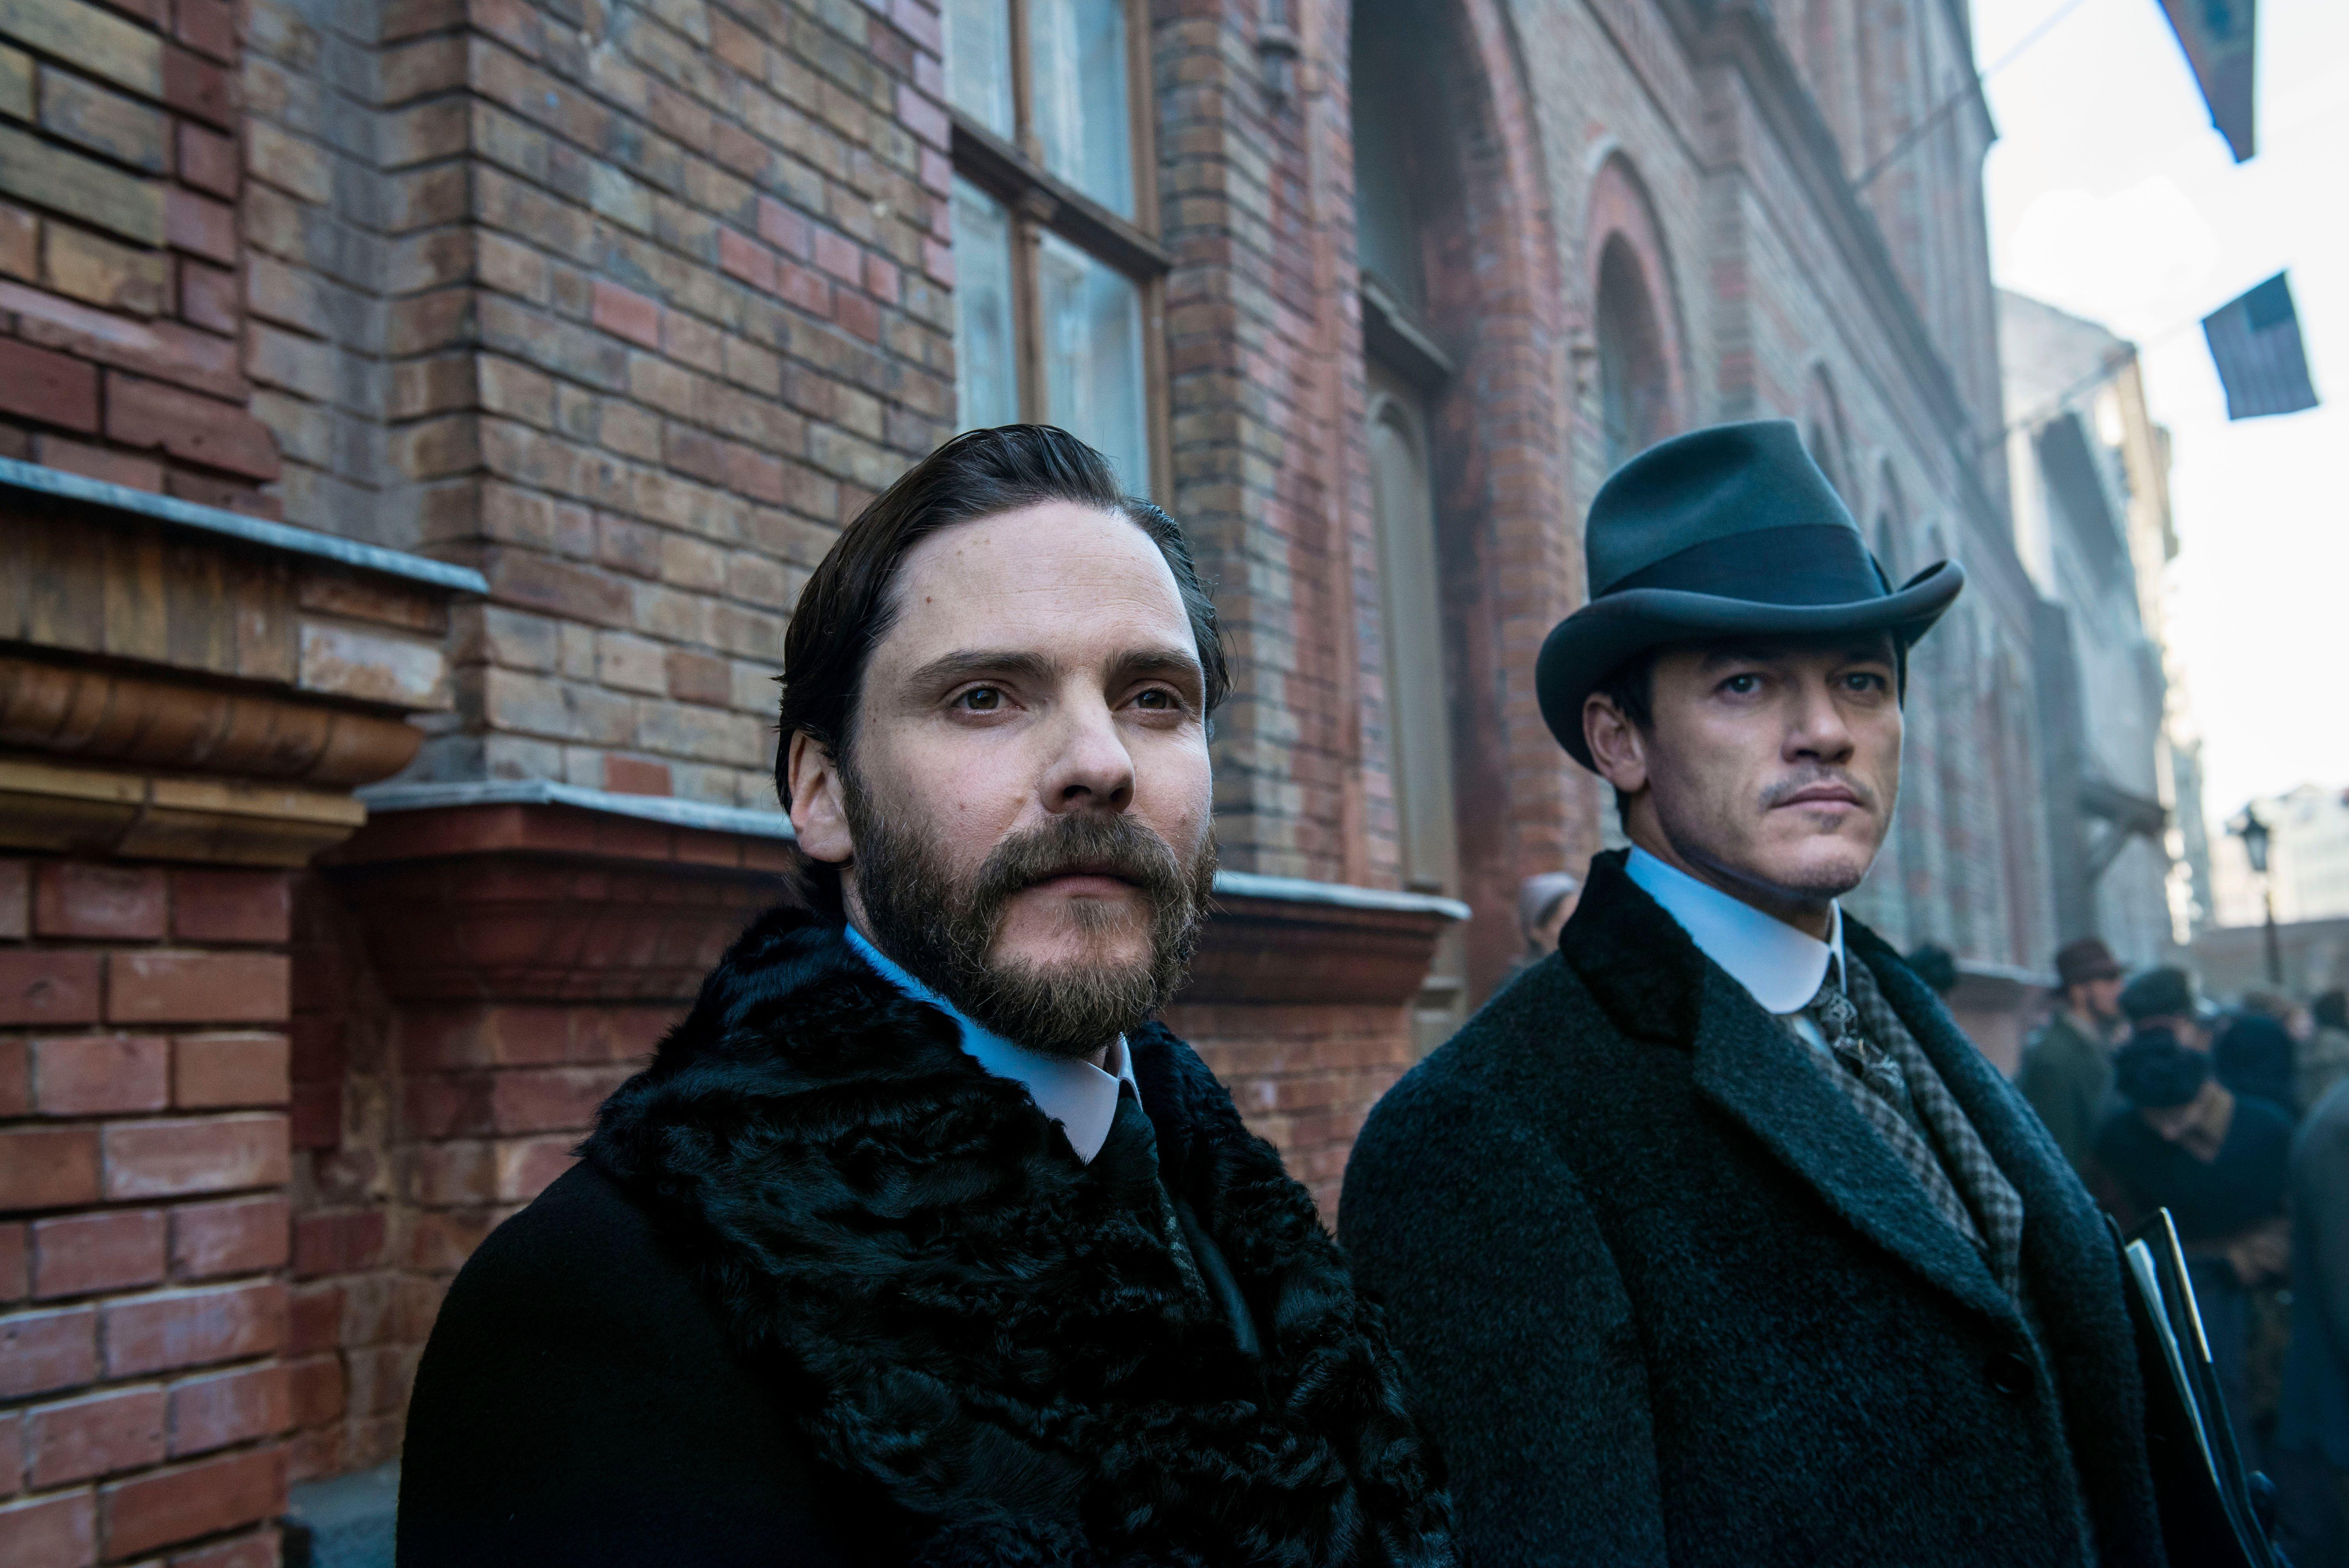 12news.com. 'Alienist' star Daniel Bruhl: 'I thought it was about